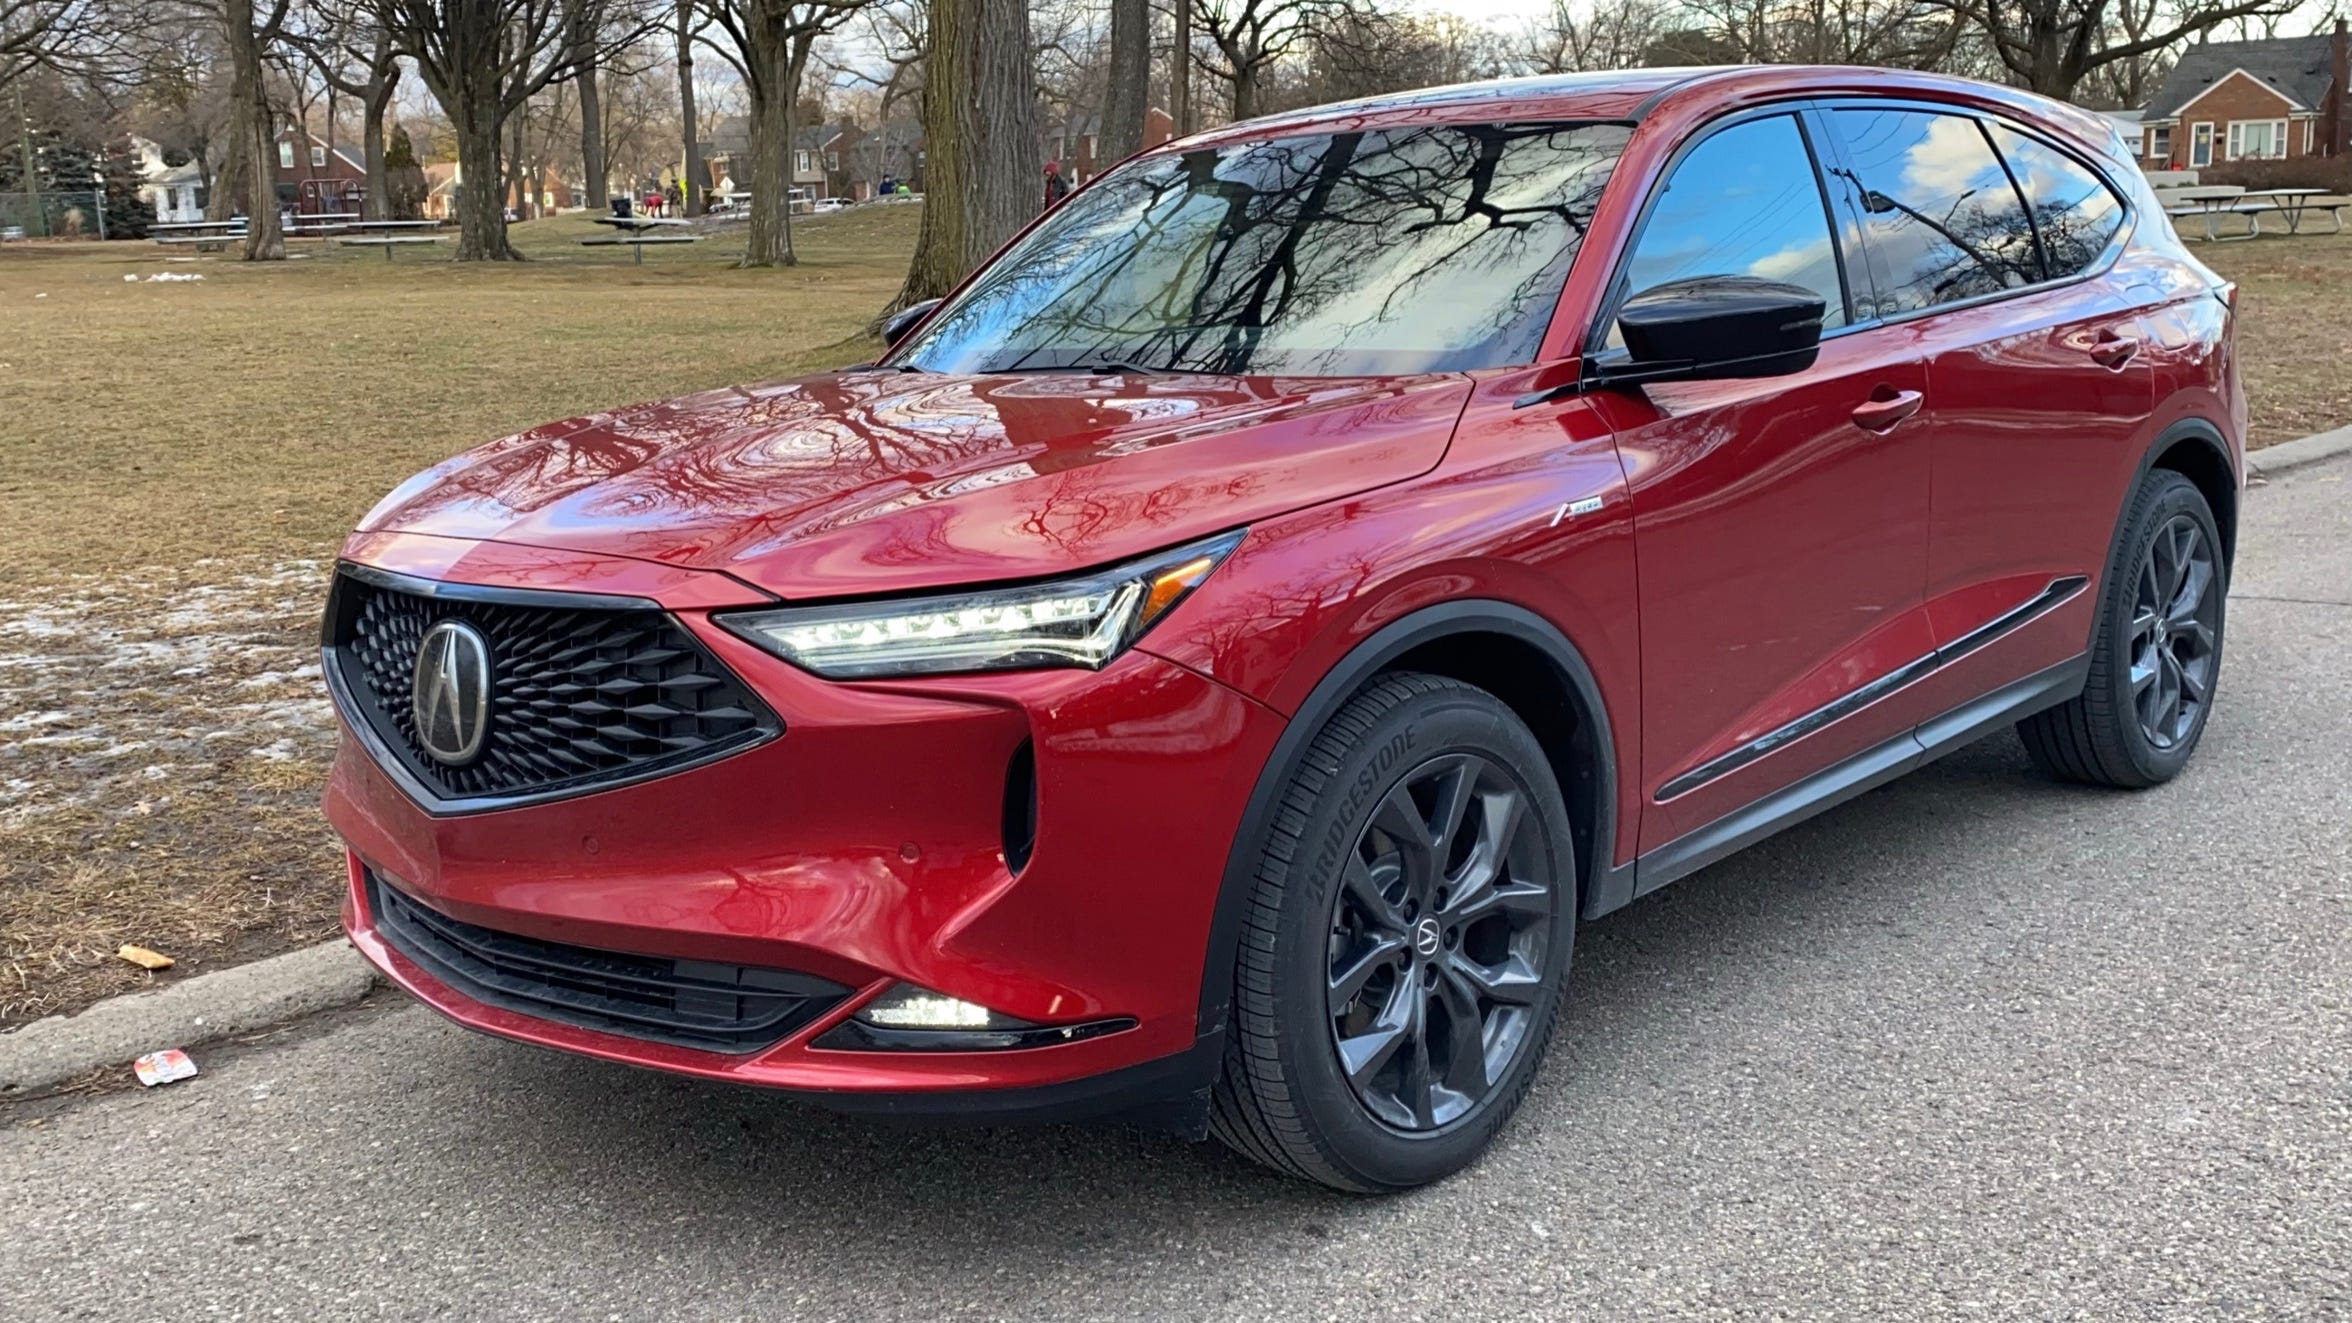 2022 Acura MDX gets the luxury brand's SUV back on track